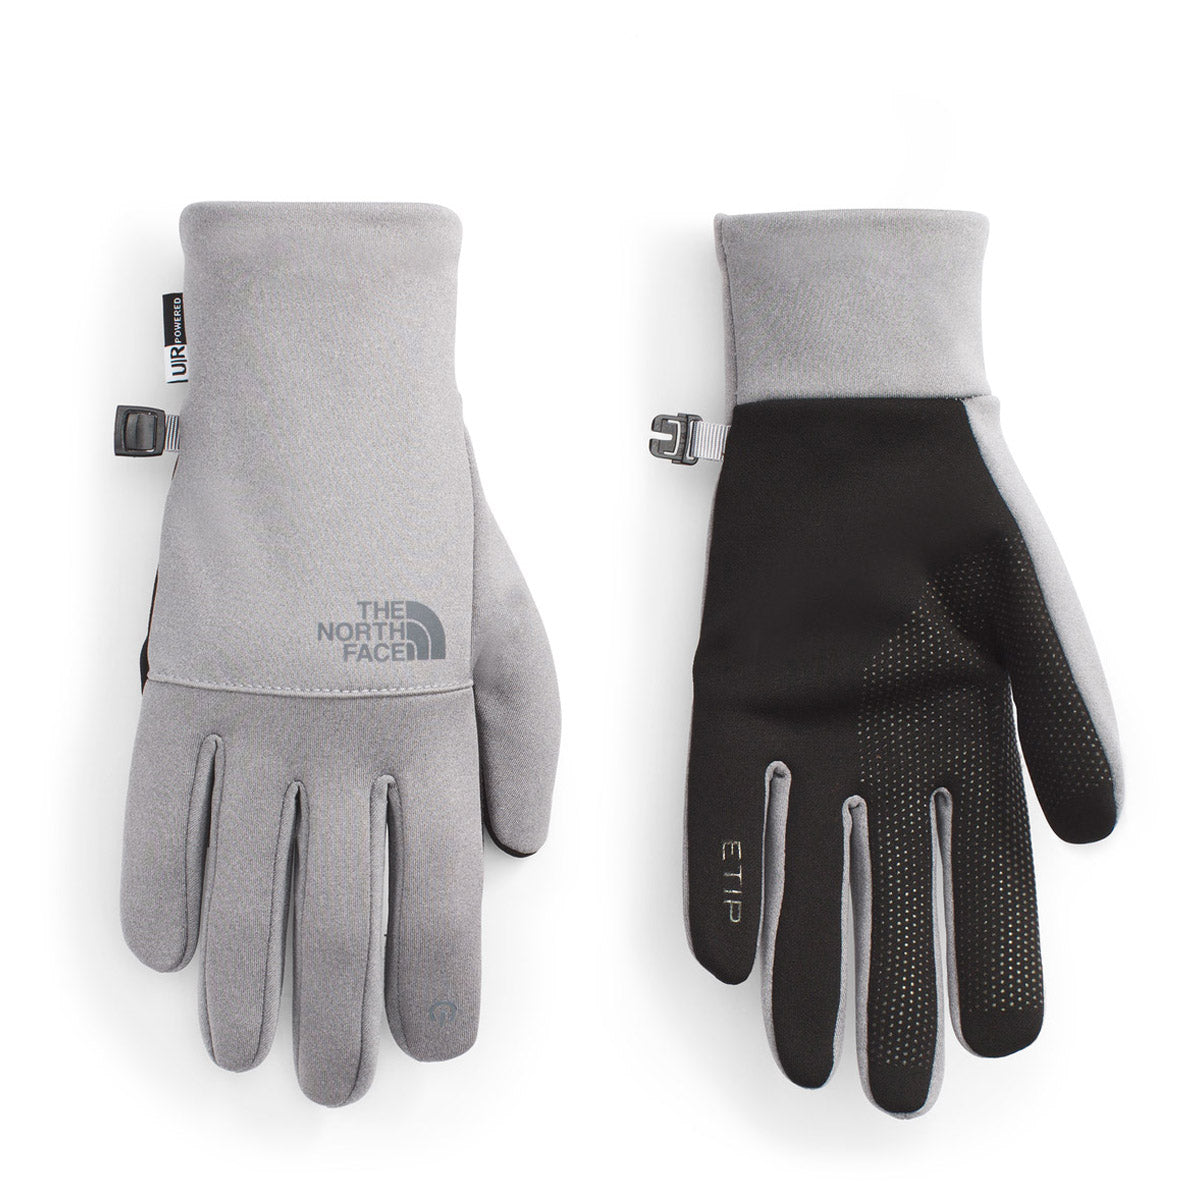 Etip Recycled Glove